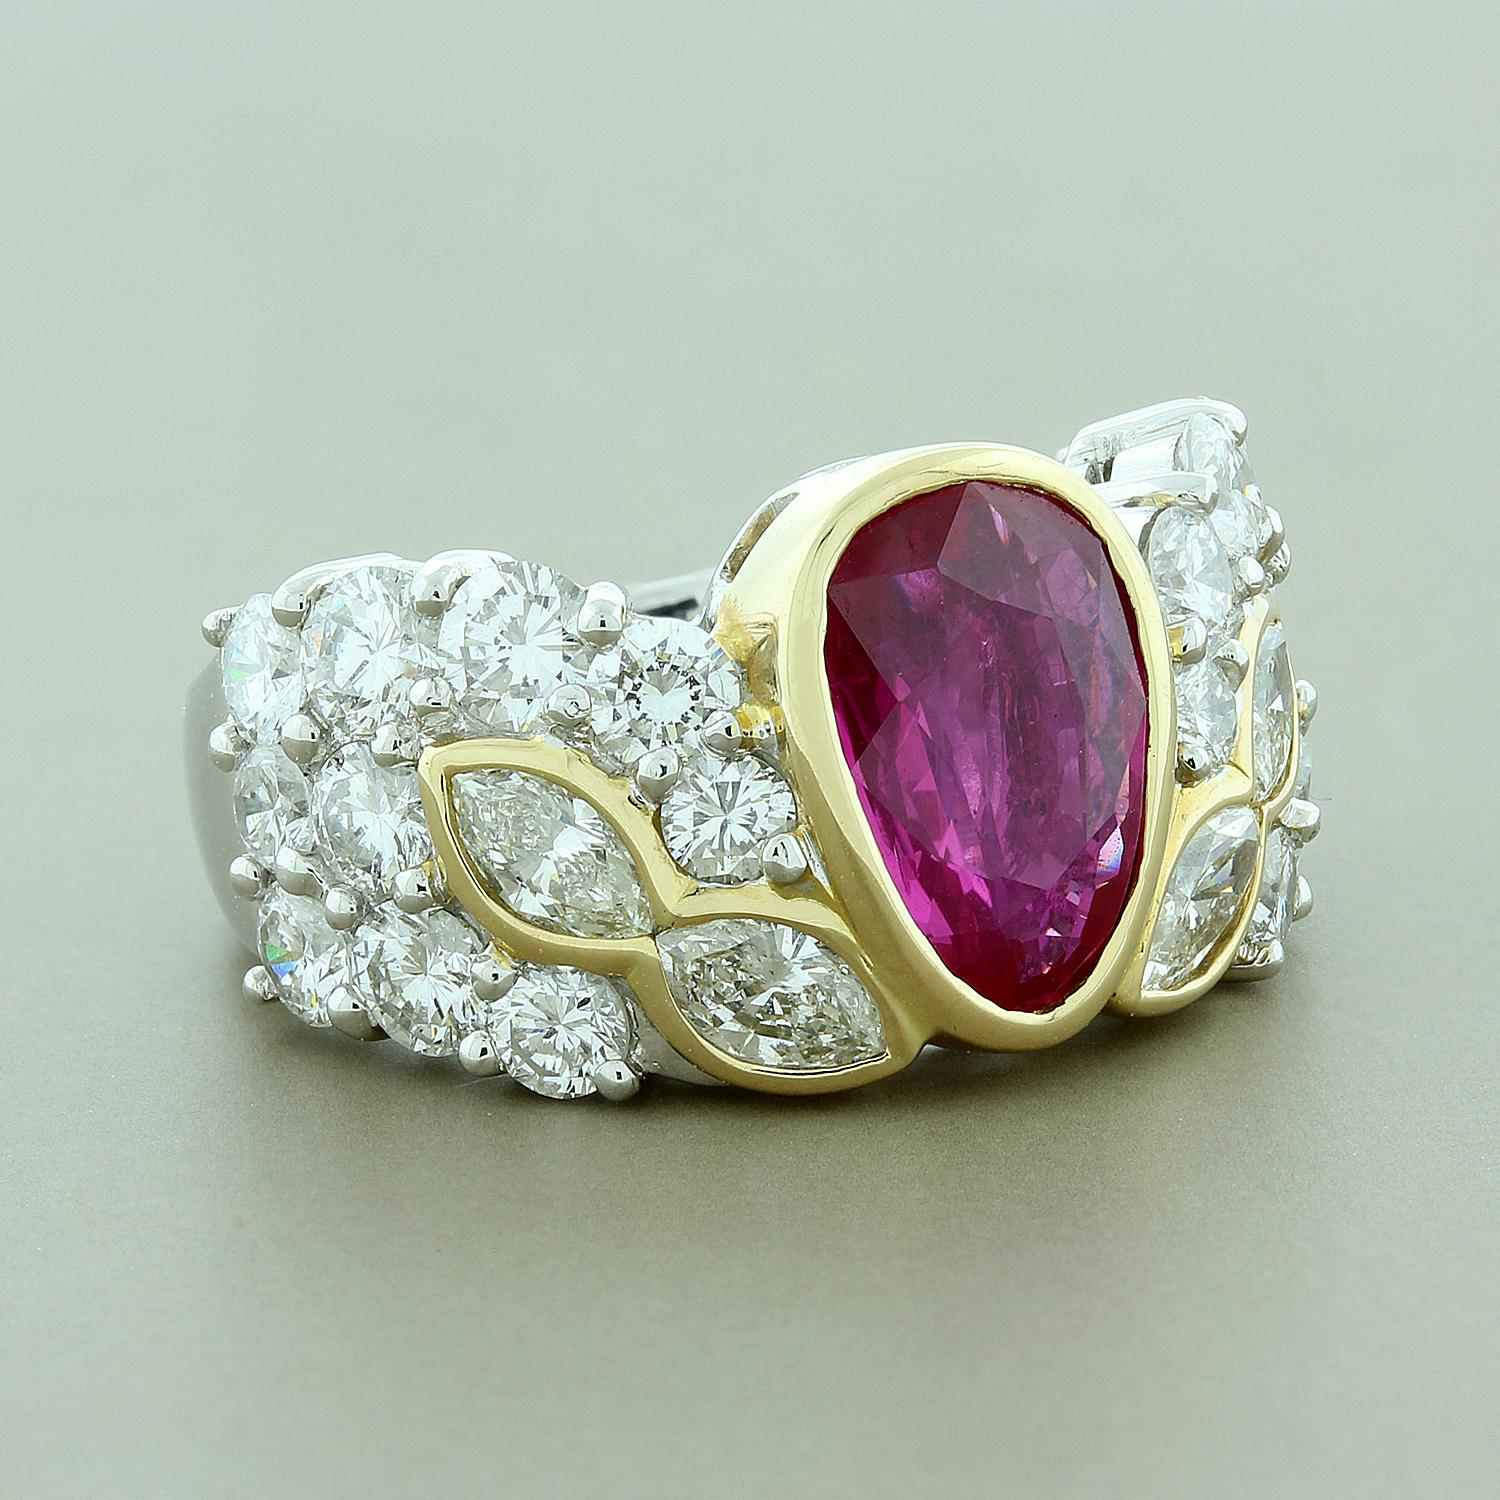 A regal 1.98 carat pear shape ruby is bezel set in the center of this elegant ring. It is accented by 2.95 carats of marquise and round brilliant cut diamonds set in 18K yellow gold over a platinum setting. A one of a kind design for a one of a kind